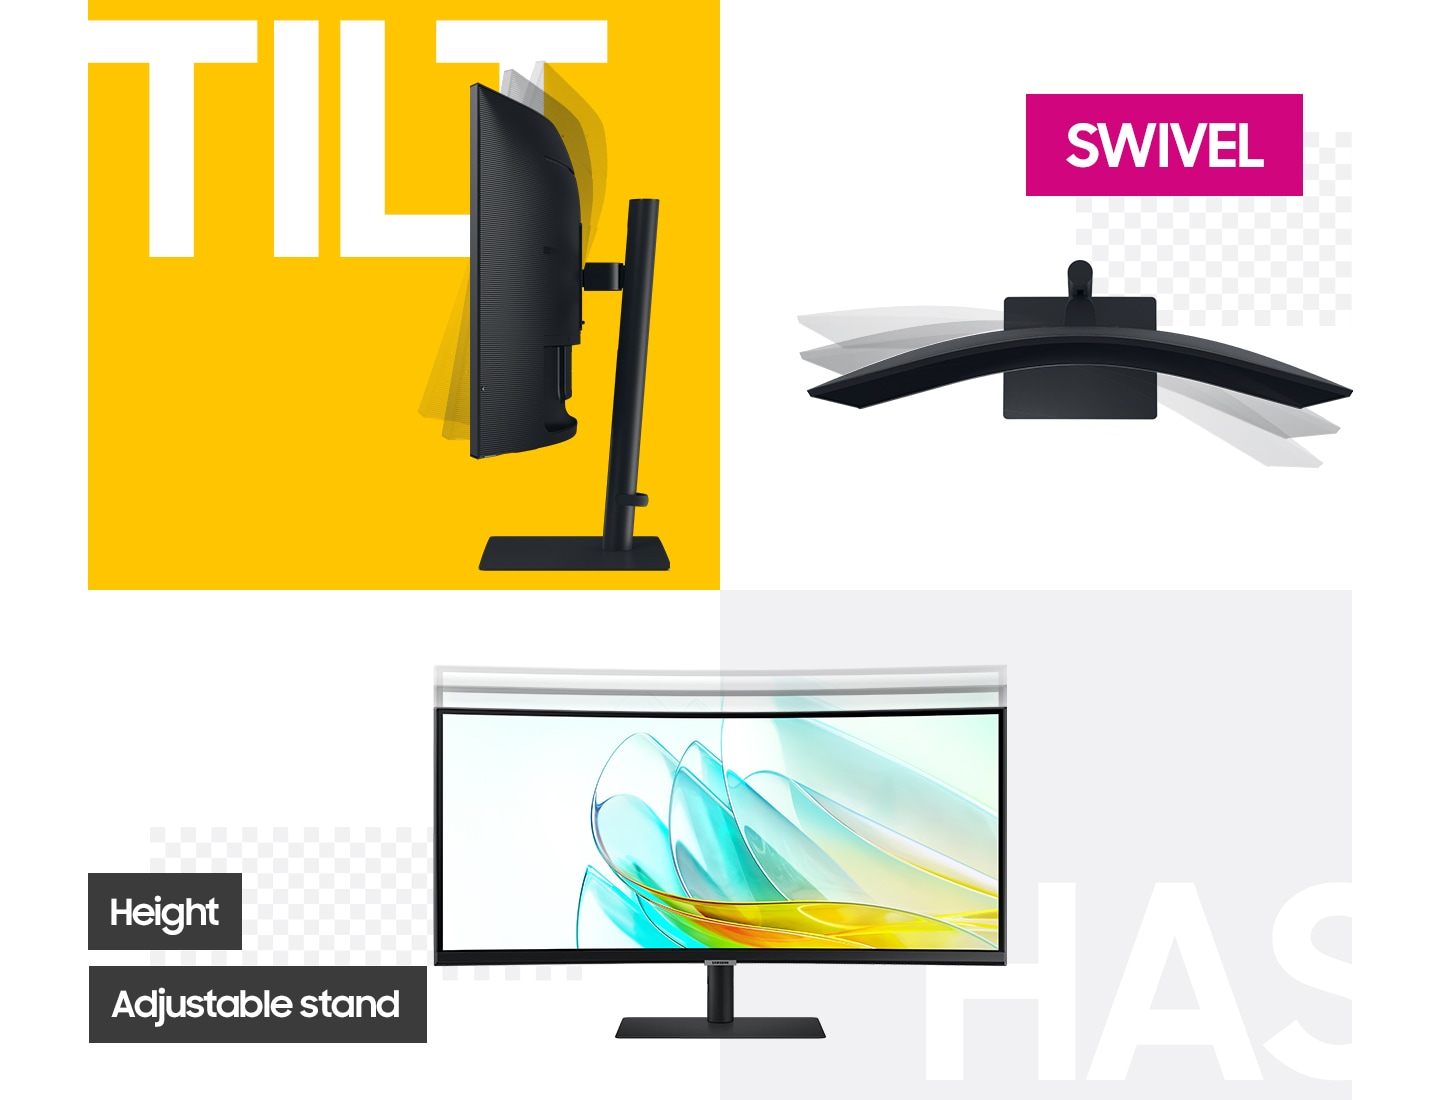 There is a monitor being tilted, and next to it, there's another monitor with is being swiveled. On the bottom of the two monitors, there's the other monitor that moves up and down. And it is with 'Height Adjustable Stand(HAS)' message.